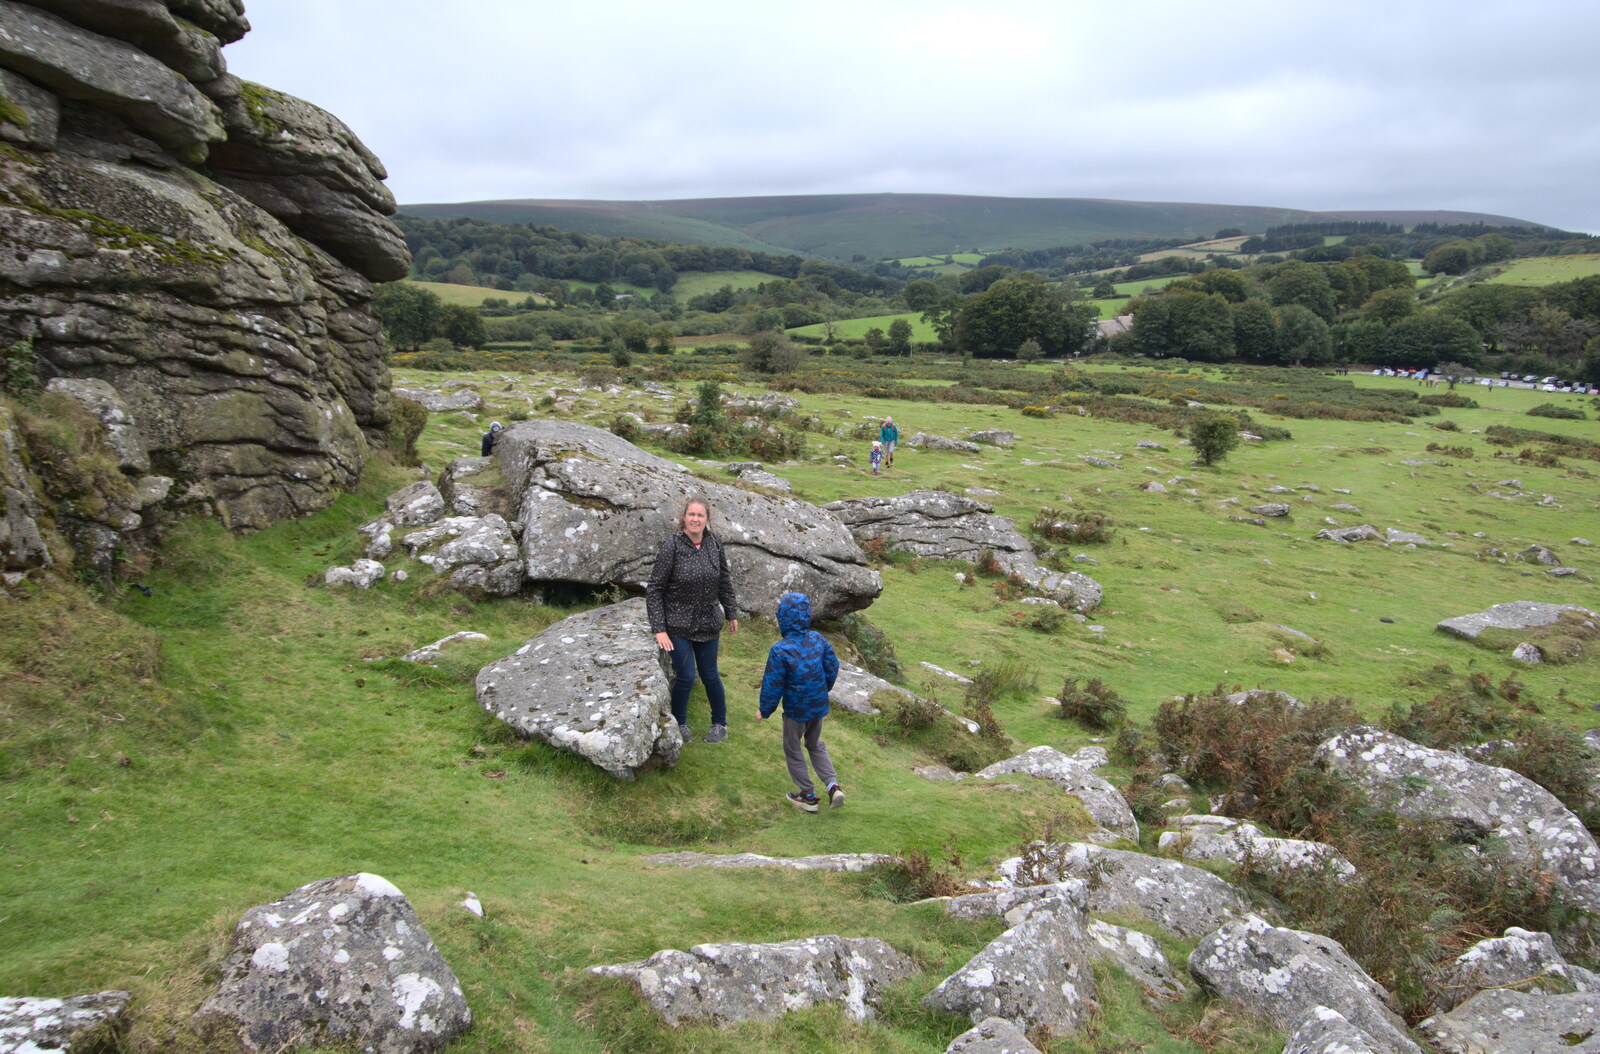 Isobel and Harry from A Walk up Hound Tor, Dartmoor, Devon - 24th August 2020